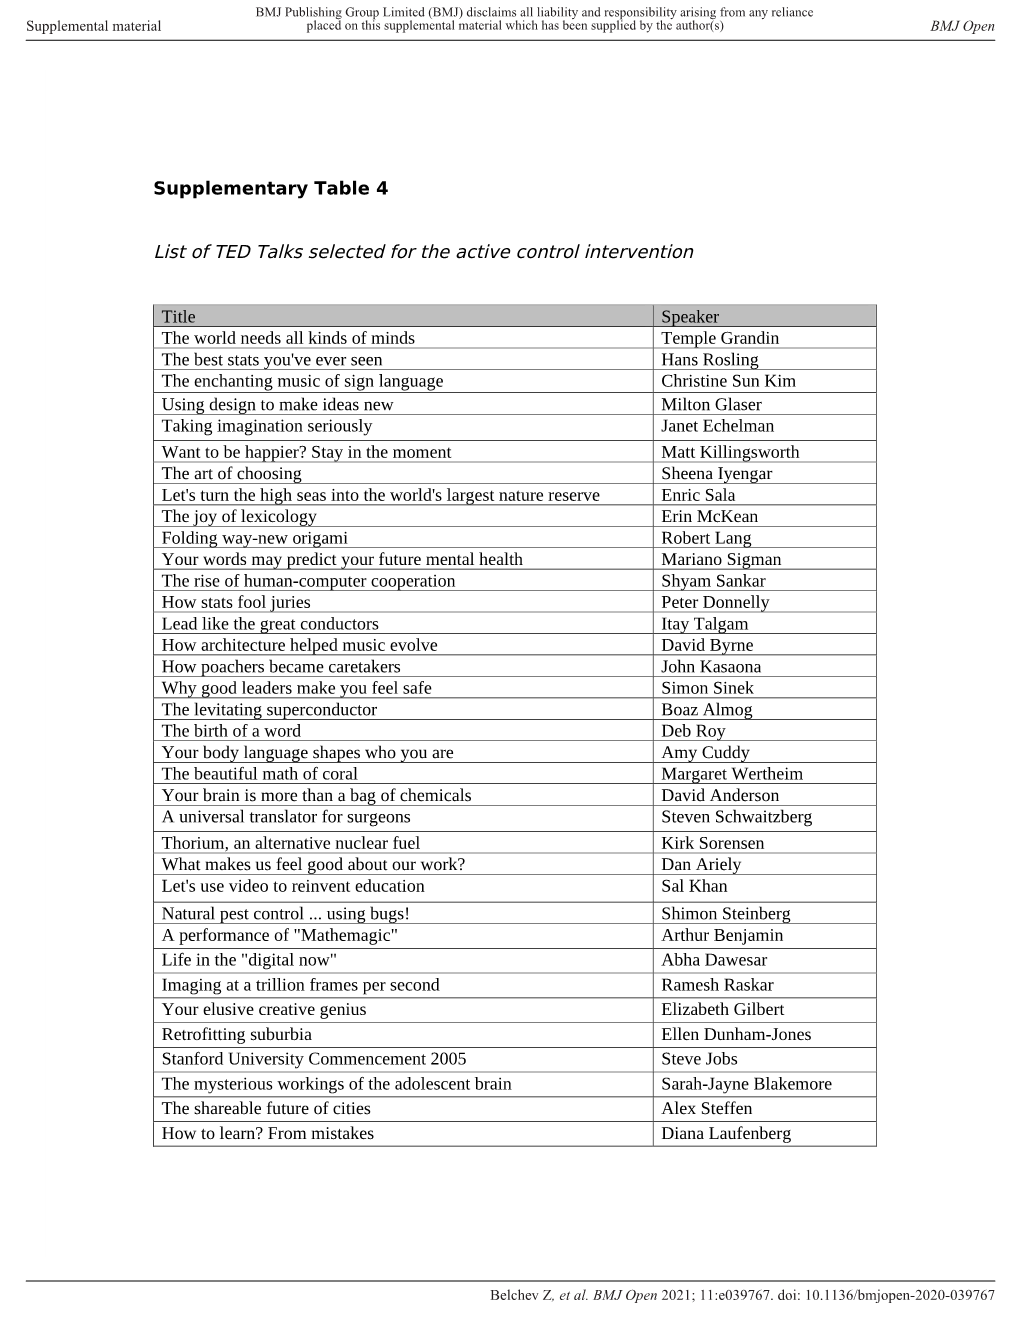 Supplementary Table 4 List of TED Talks Selected for the Active Control